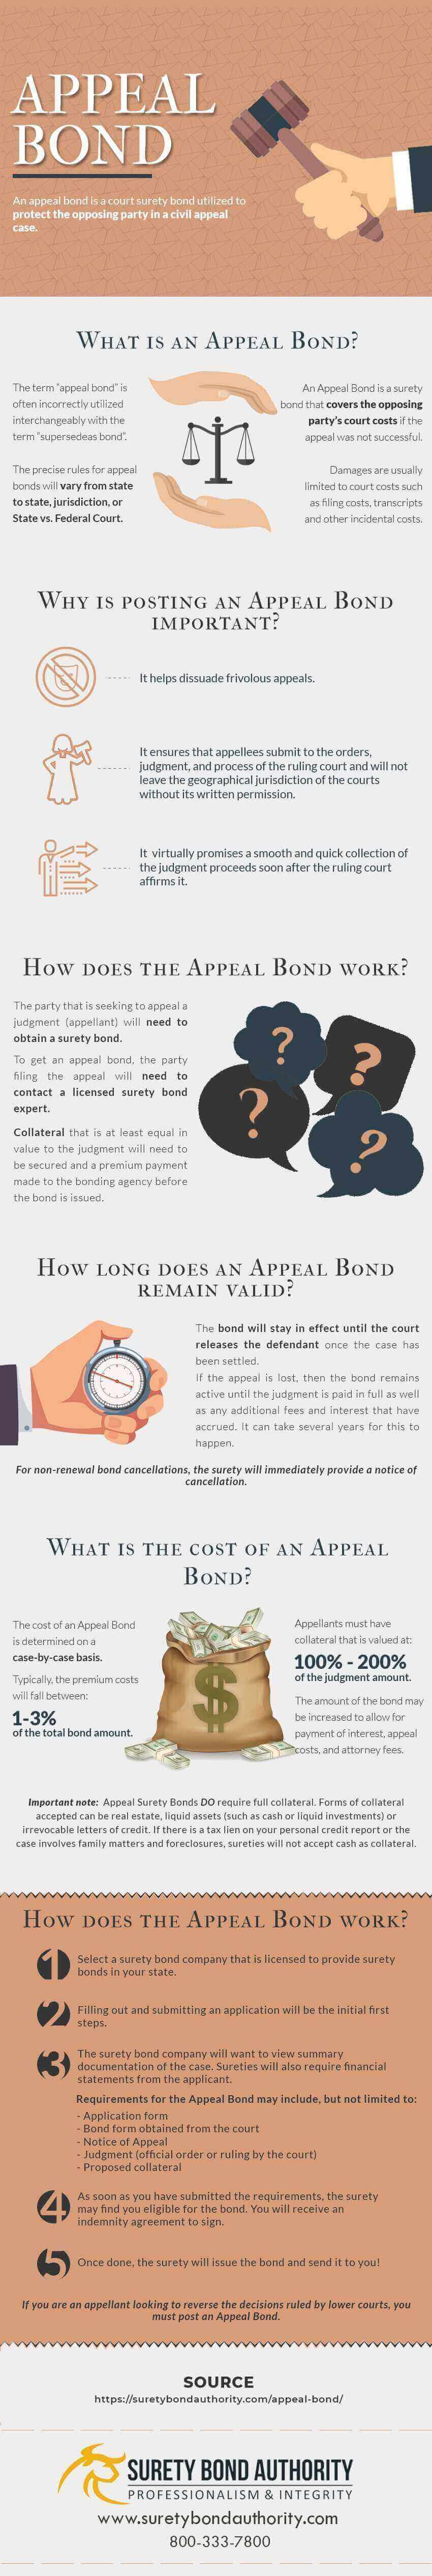 Appeal Bond Infographic